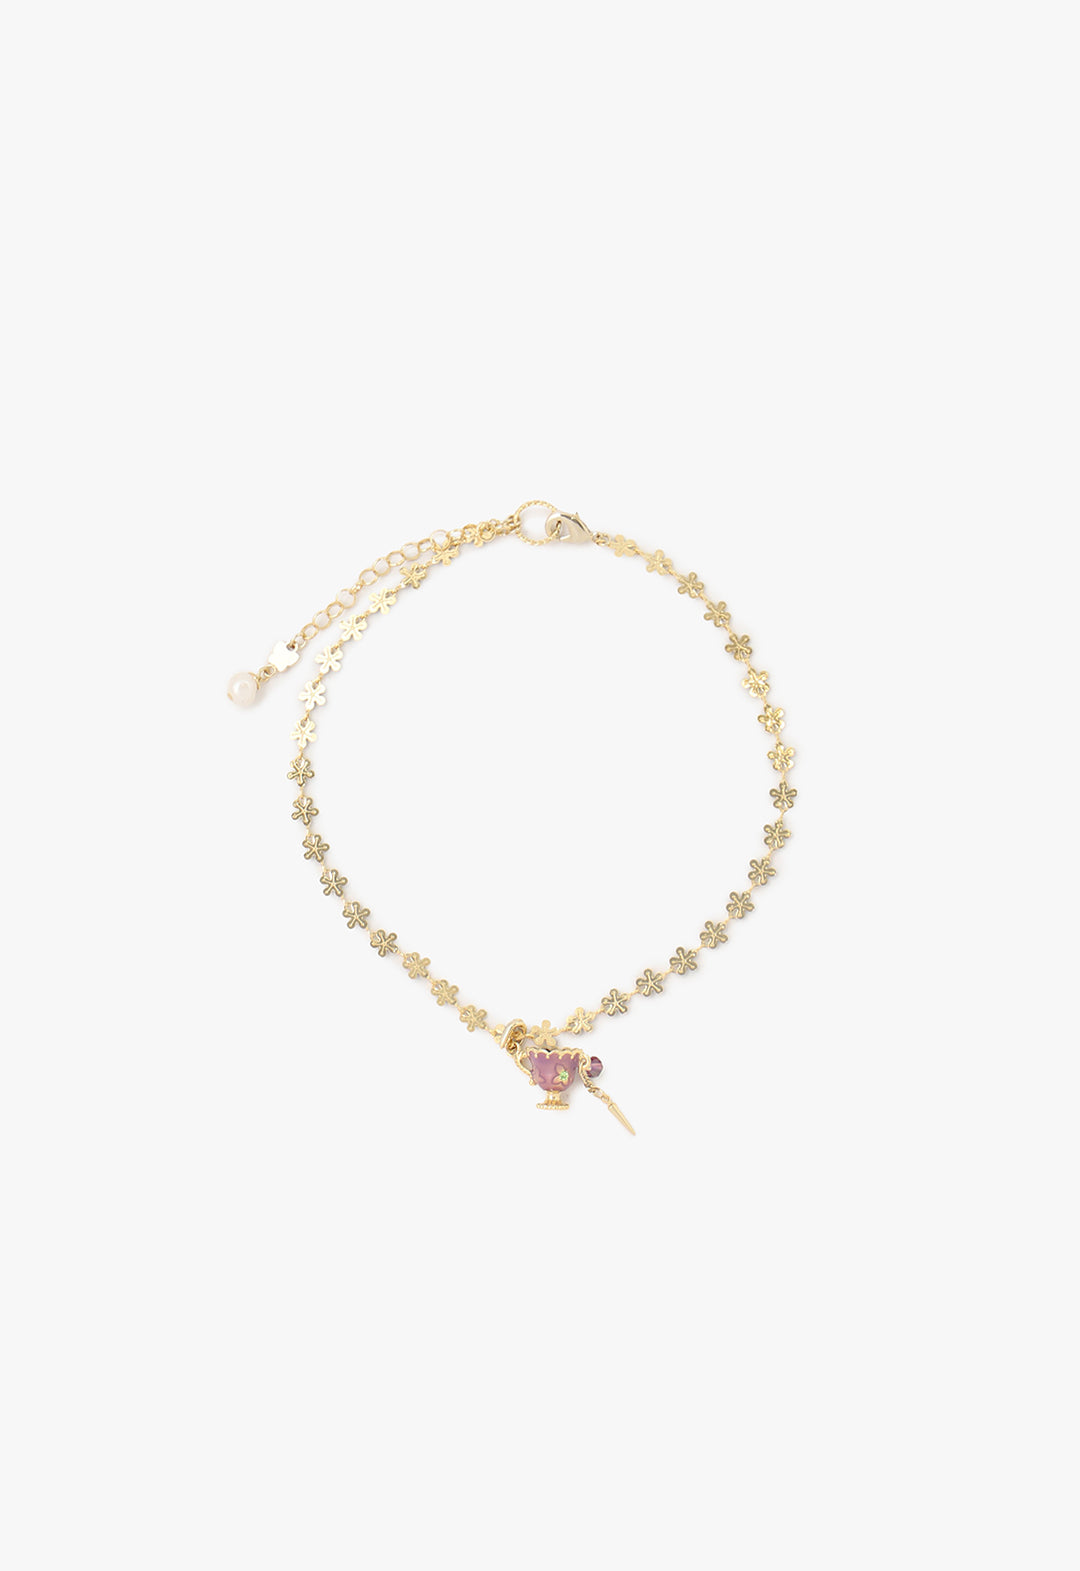 Metal gold color plating chain is with a lobster claw clasp lock, pink Teacup with gold accents